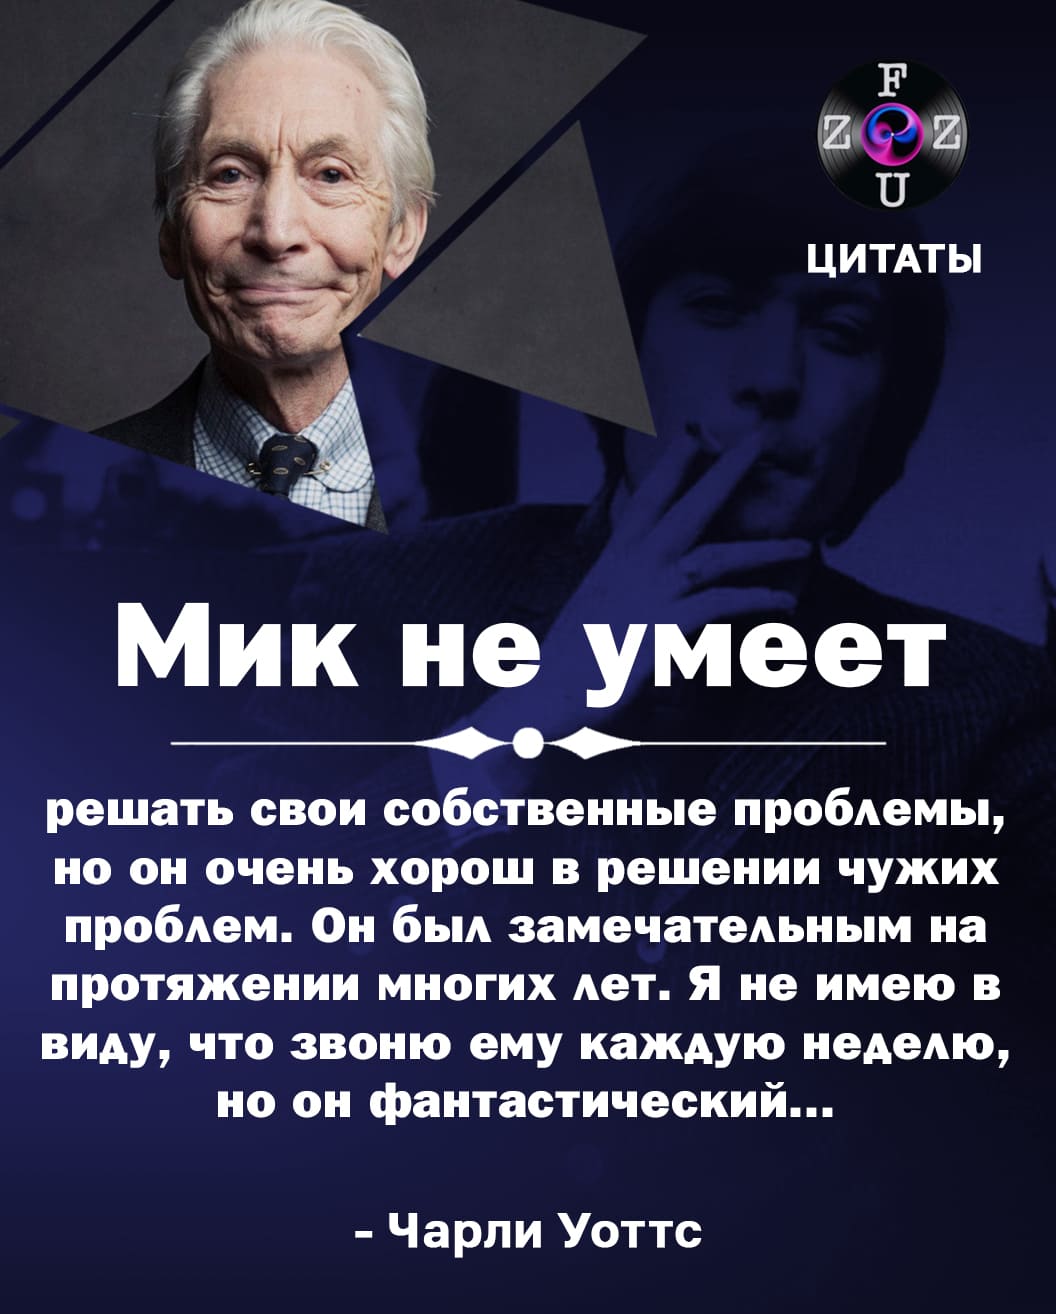 Quotes by Charlie Watts